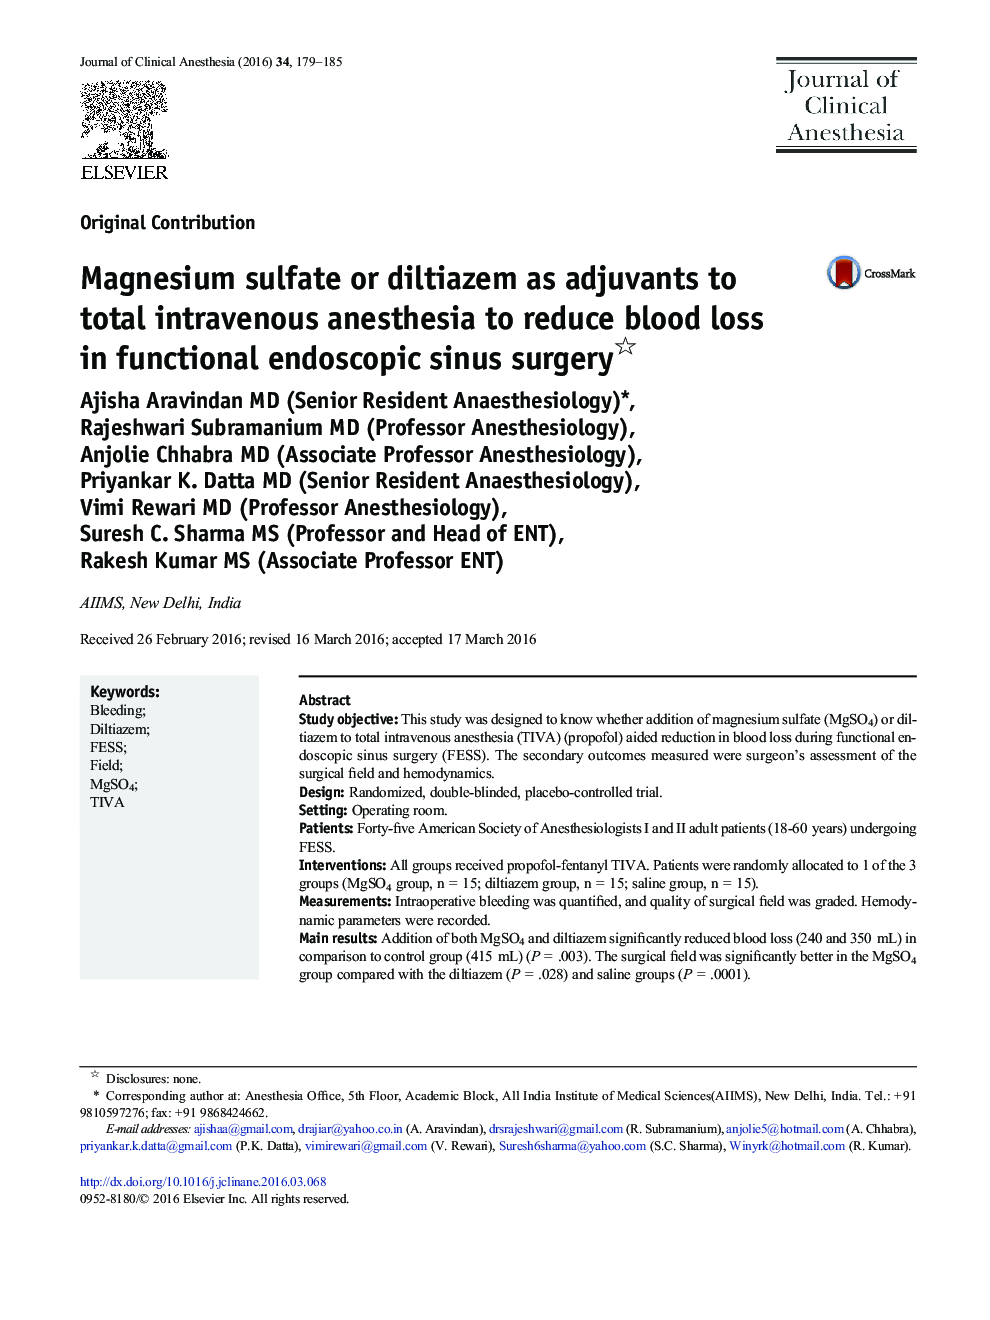 Original ContributionMagnesium sulfate or diltiazem as adjuvants to total intravenous anesthesia to reduce blood loss in functional endoscopic sinus surgery